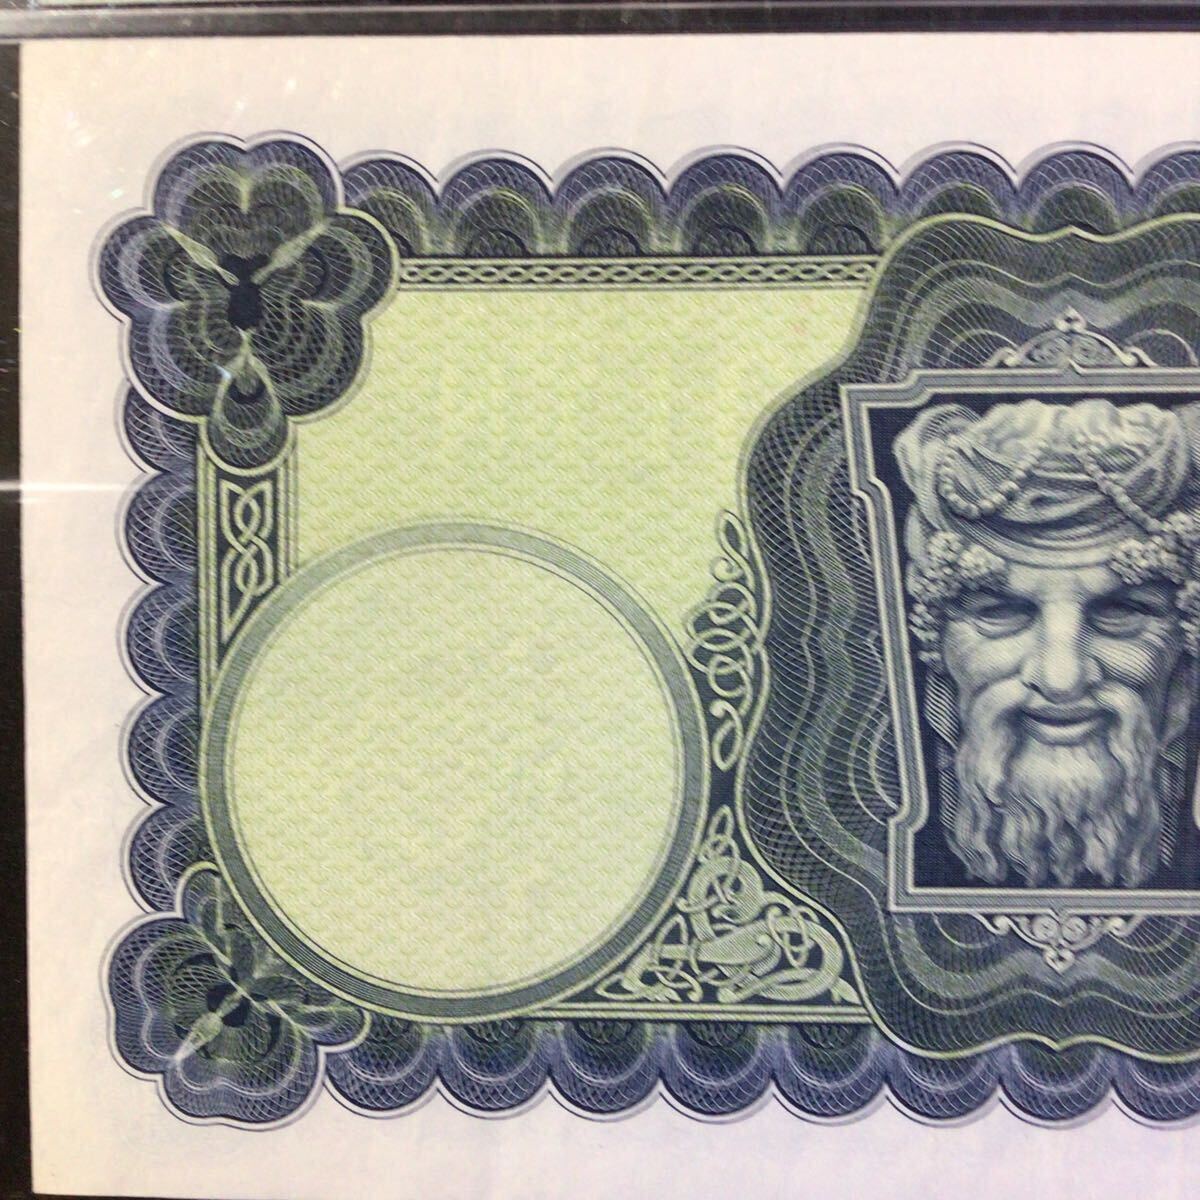 World Banknote Grading IRELAND REPUBLIC《Central Bank》 10 Pounds【1975】『PMG Grading Choice Very Fine 35』_画像6